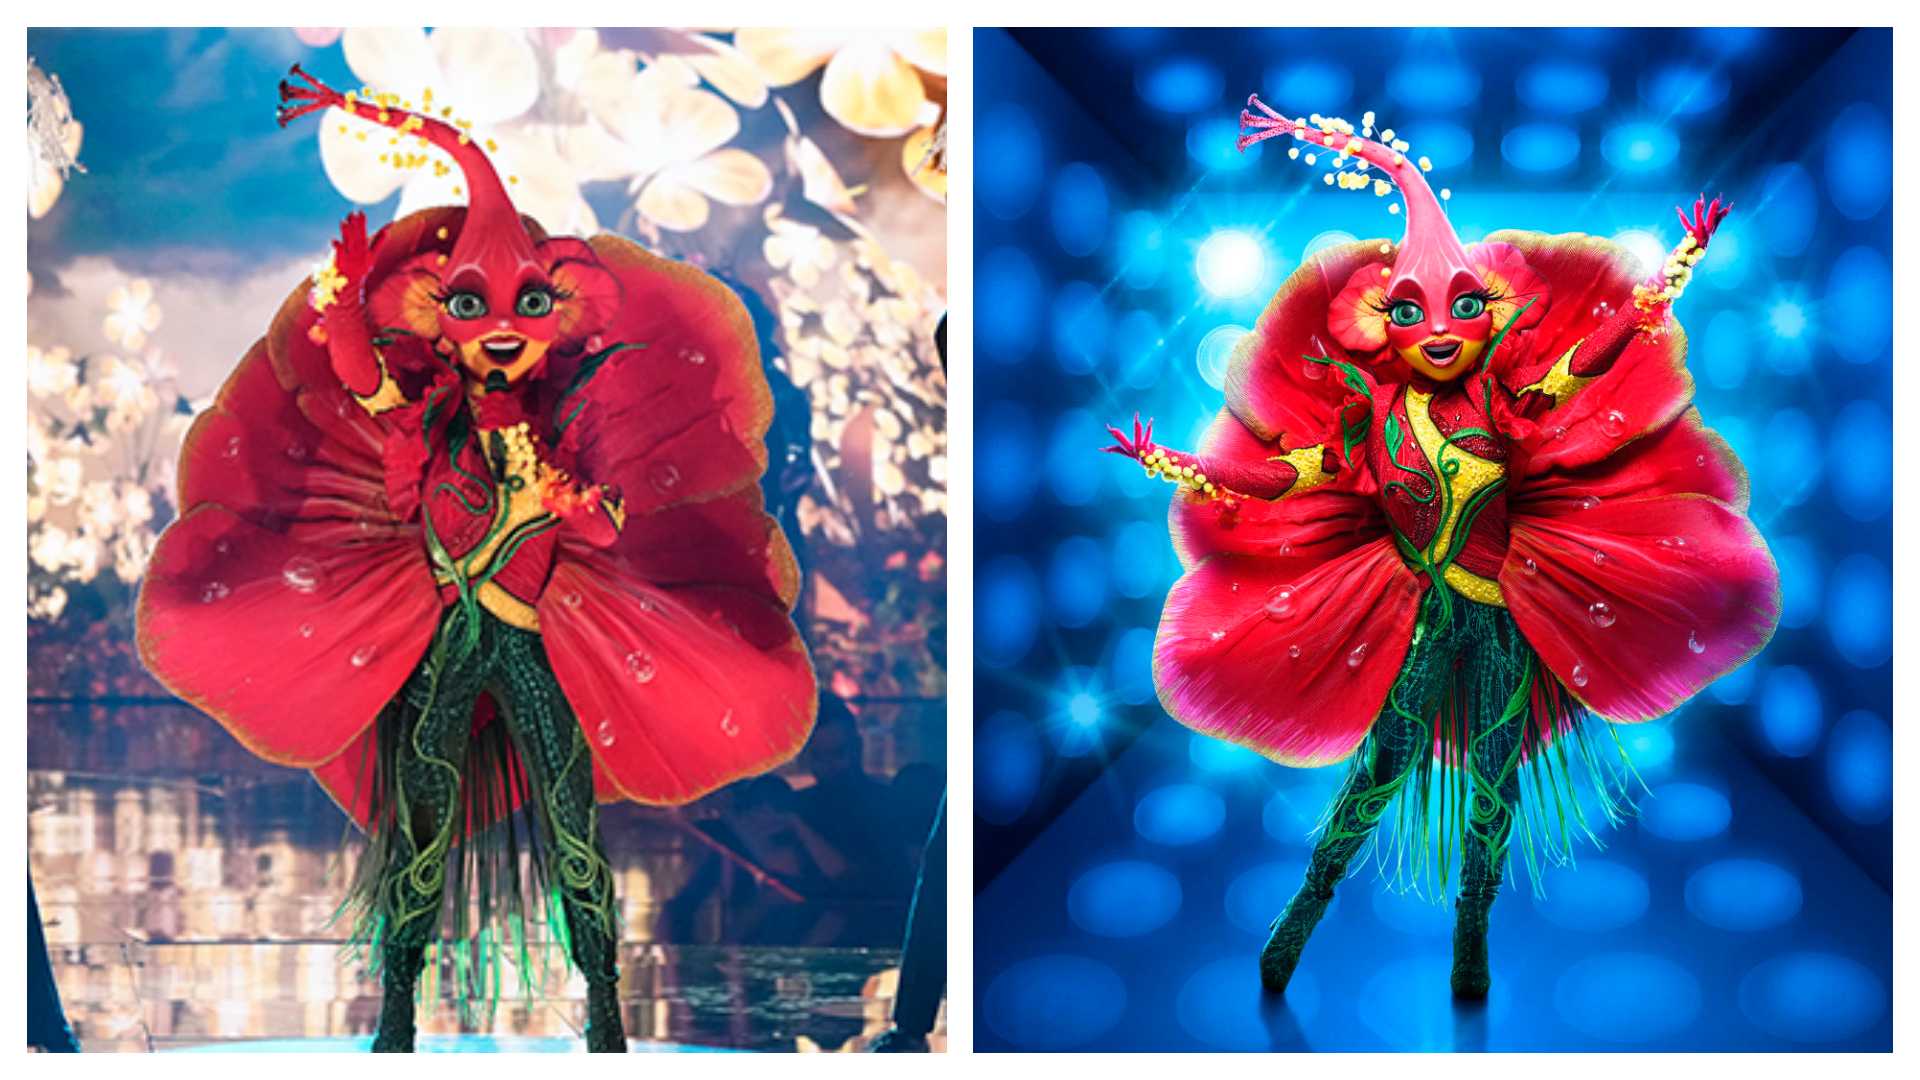 The Masked singer's hibiscus bloomed then dropped, revealing reality TV royalty